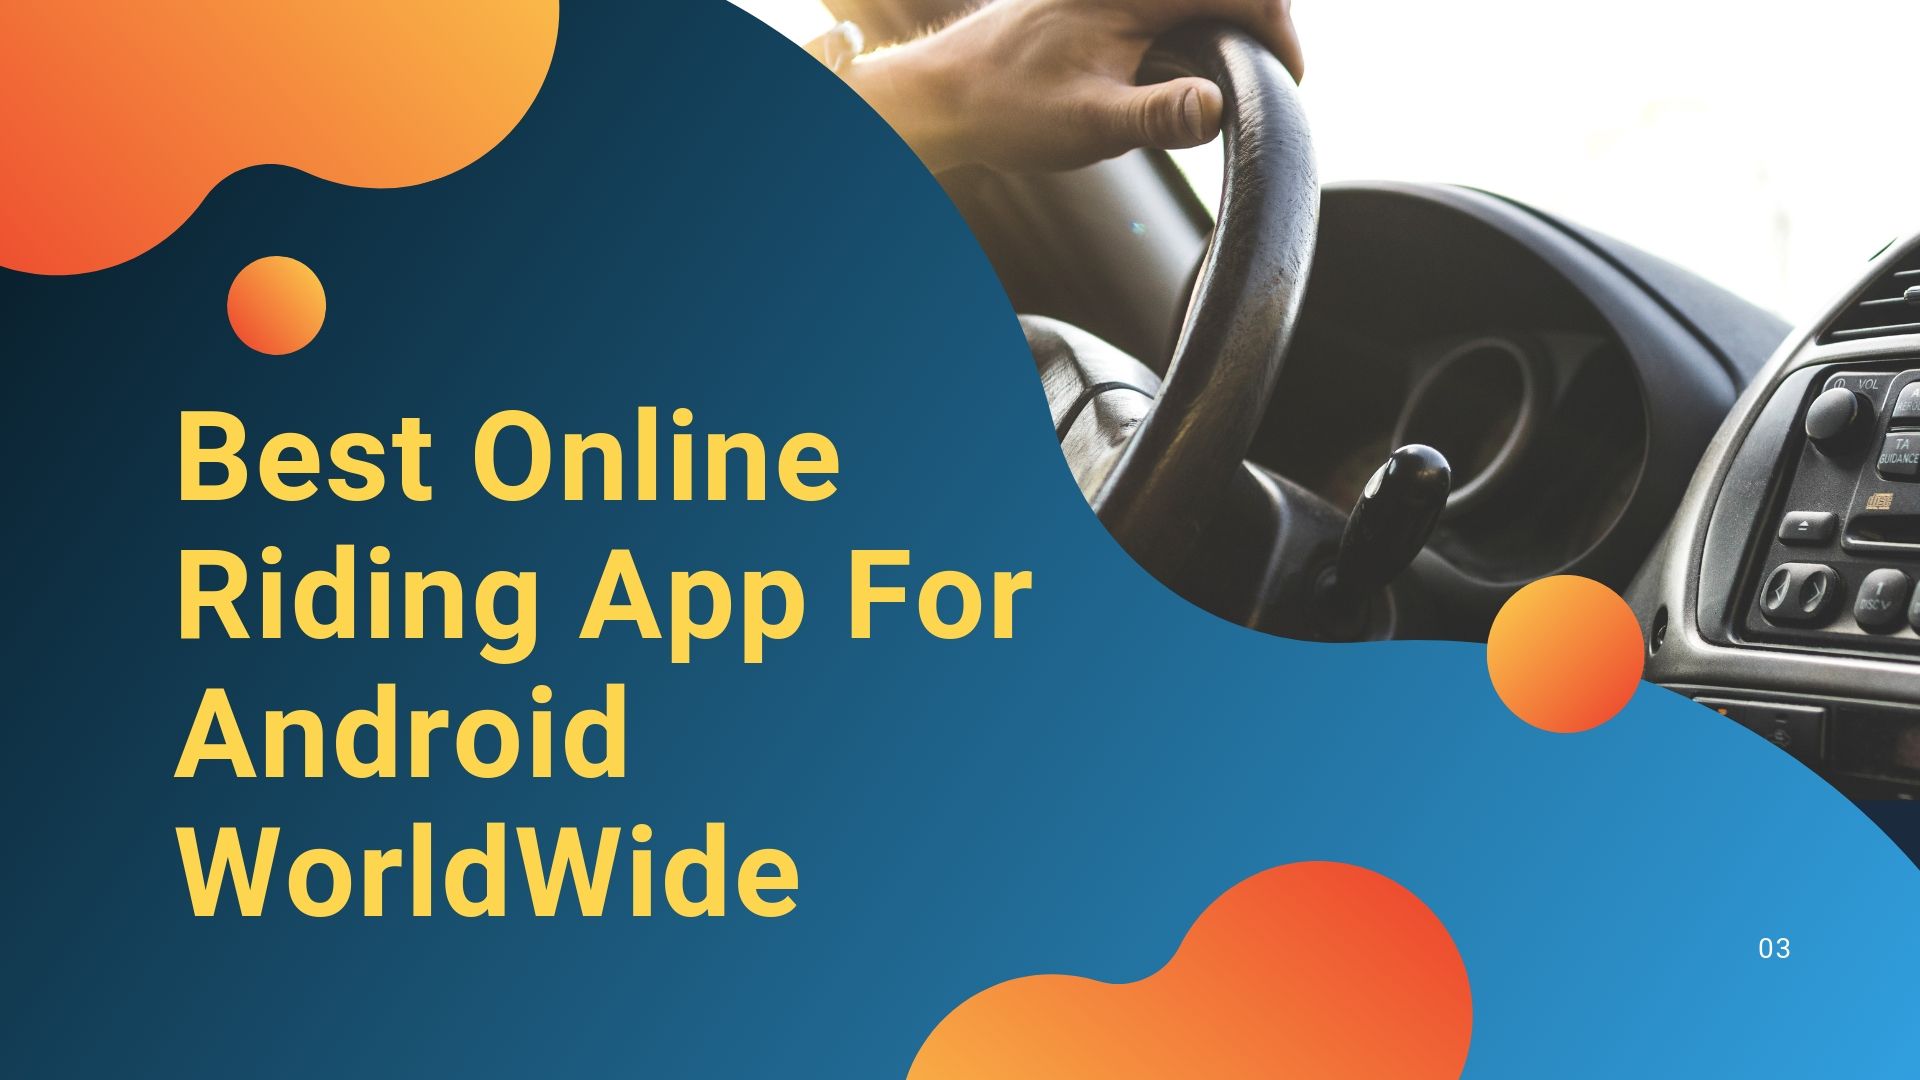 Best Online Riding App For Android World Wide